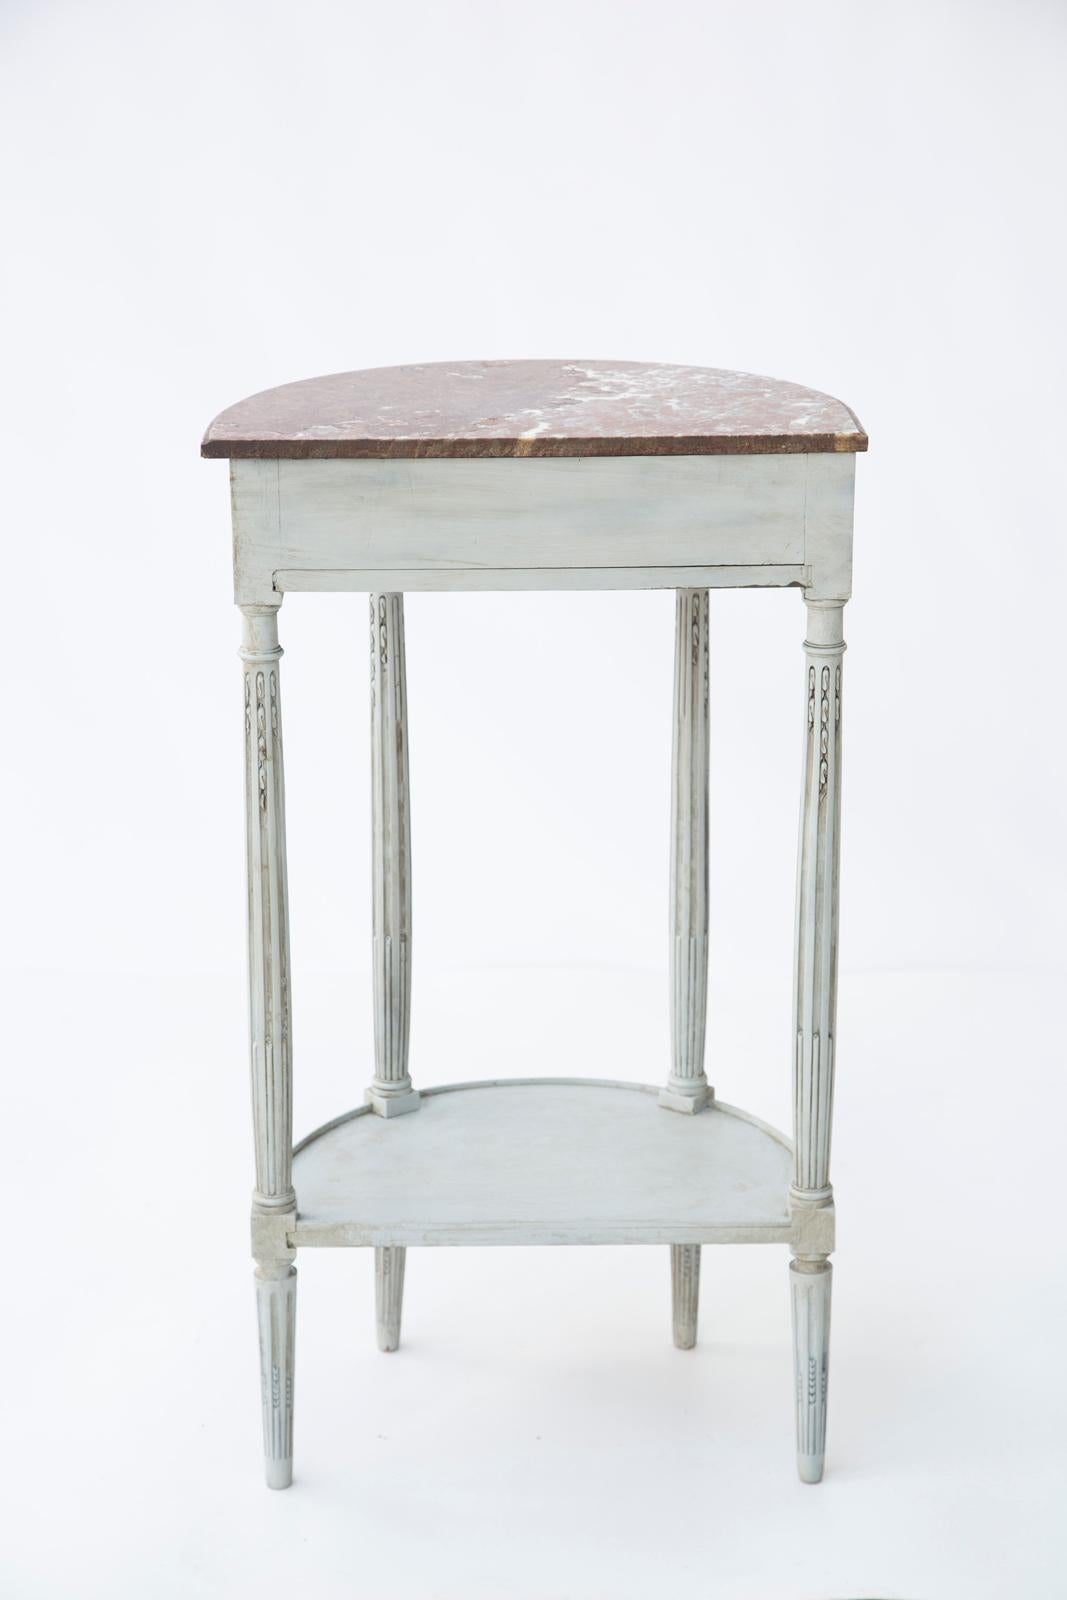 Painted Demilune Hall Stand with Breccia Marble Top 1